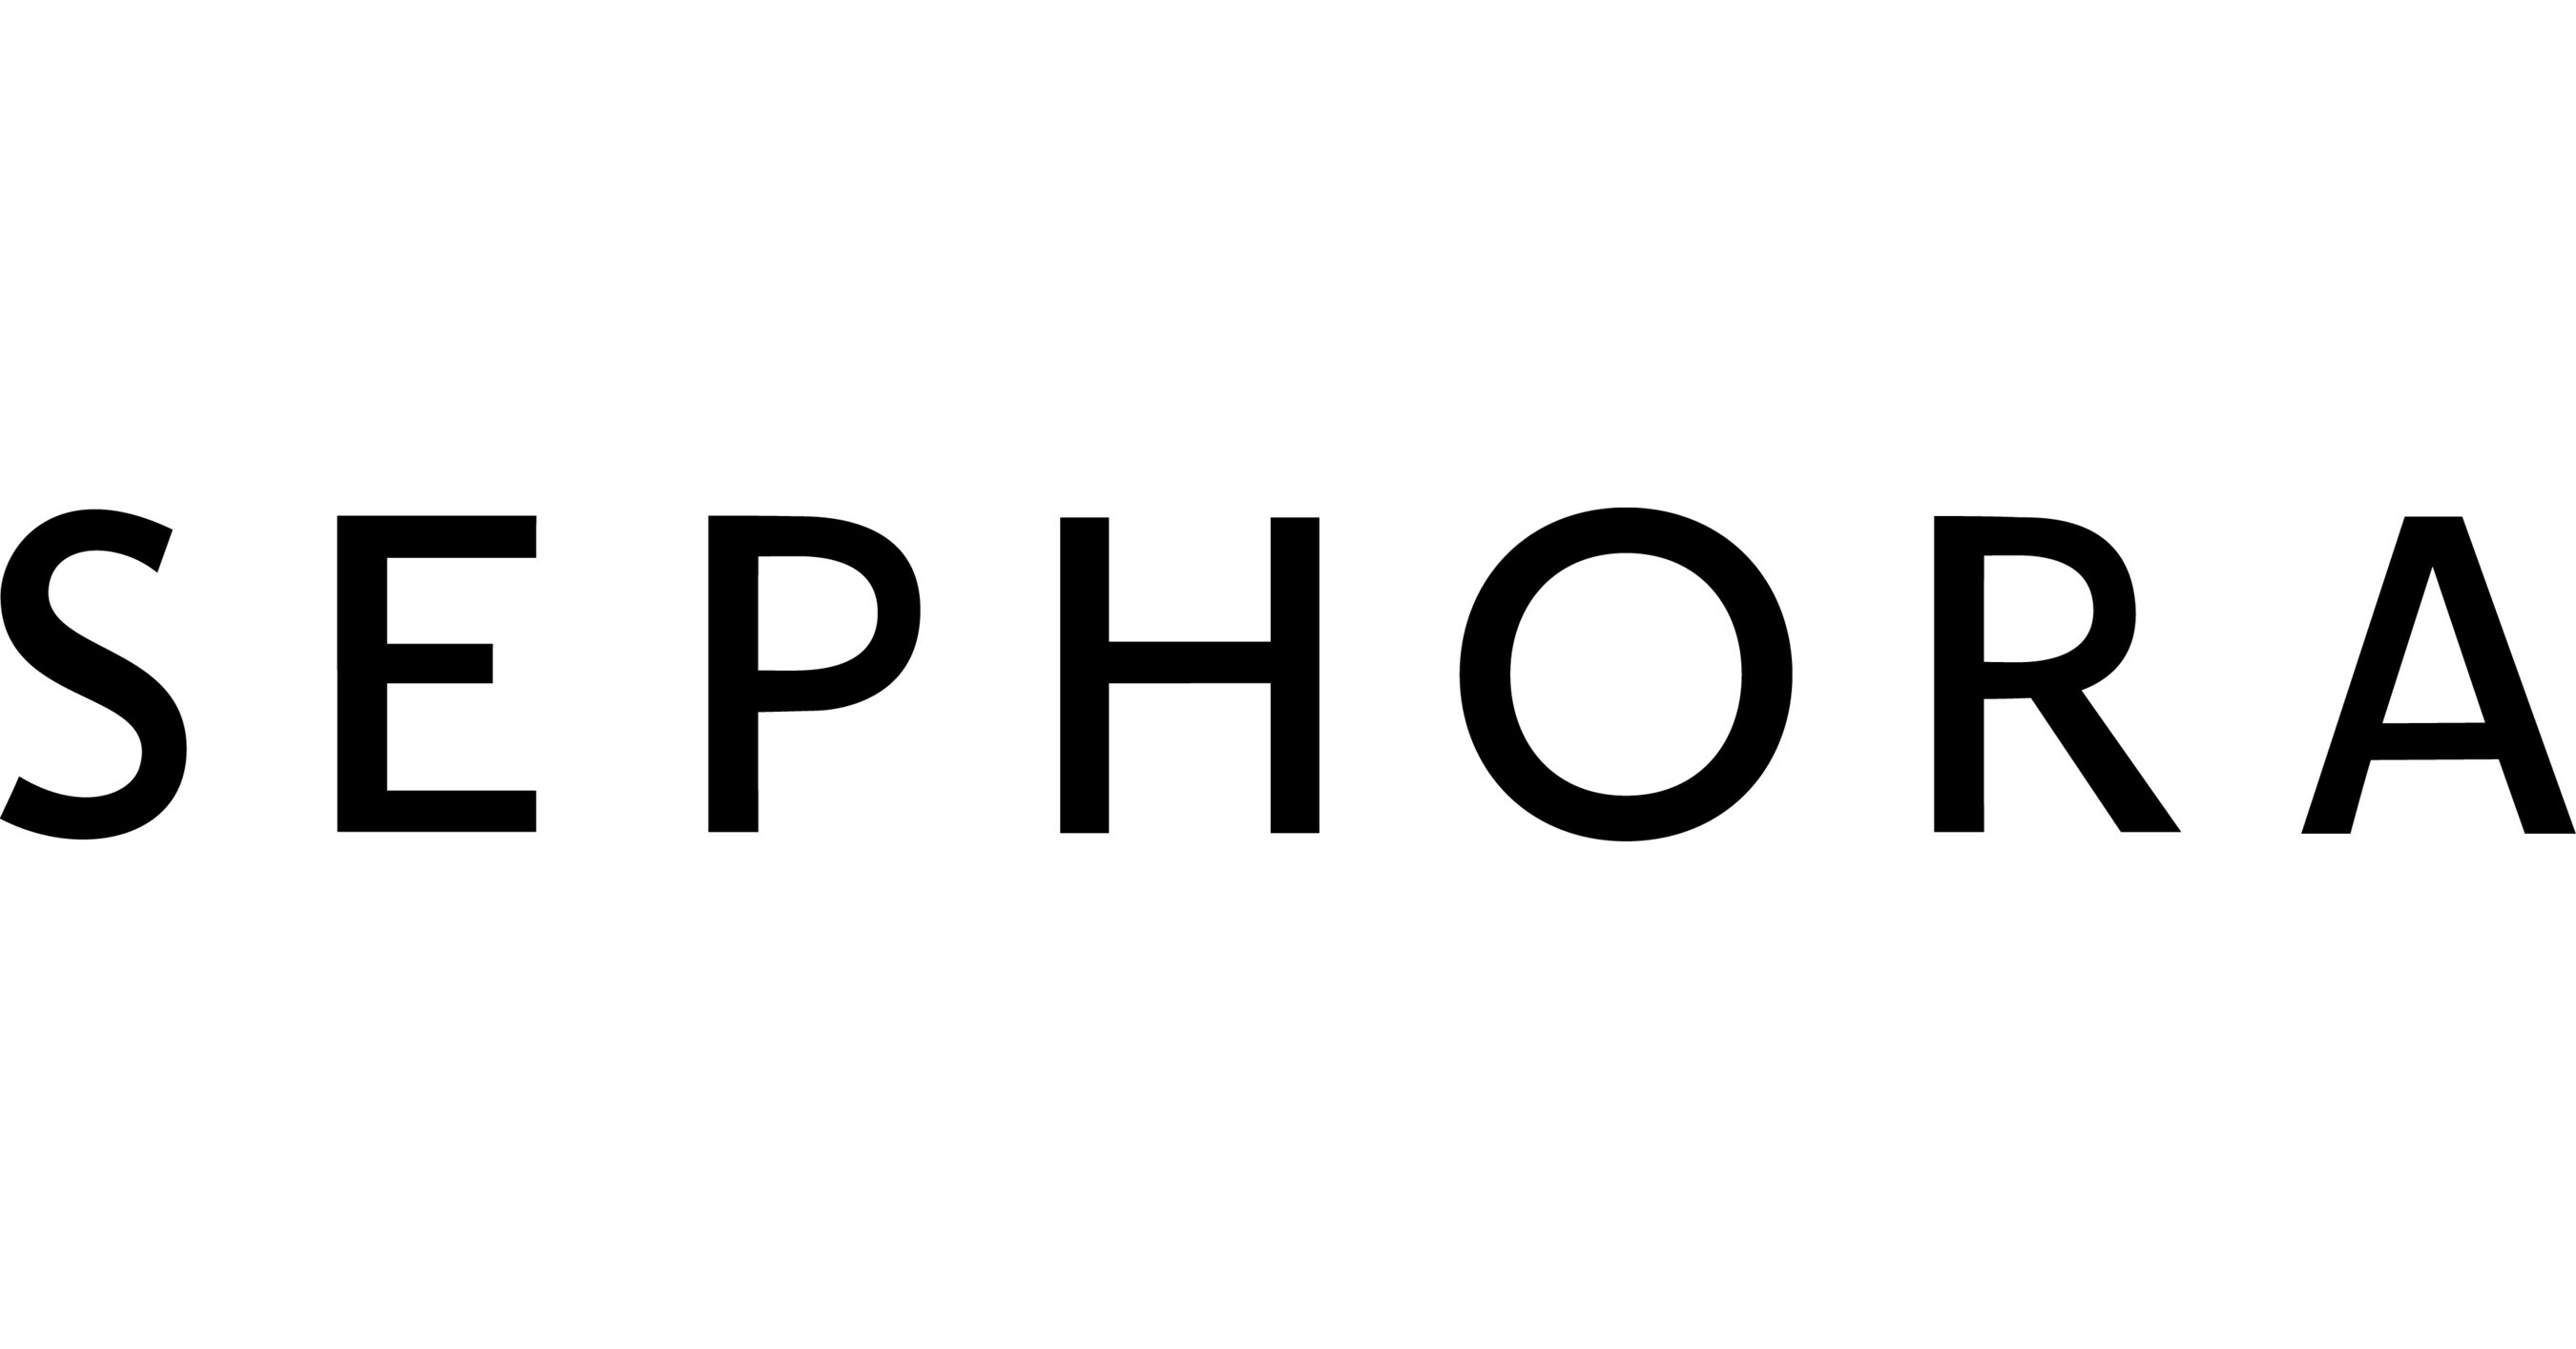 IN HONOR OF WORLD MENTAL HEALTH DAY, SEPHORA COMMITS TO DONATING